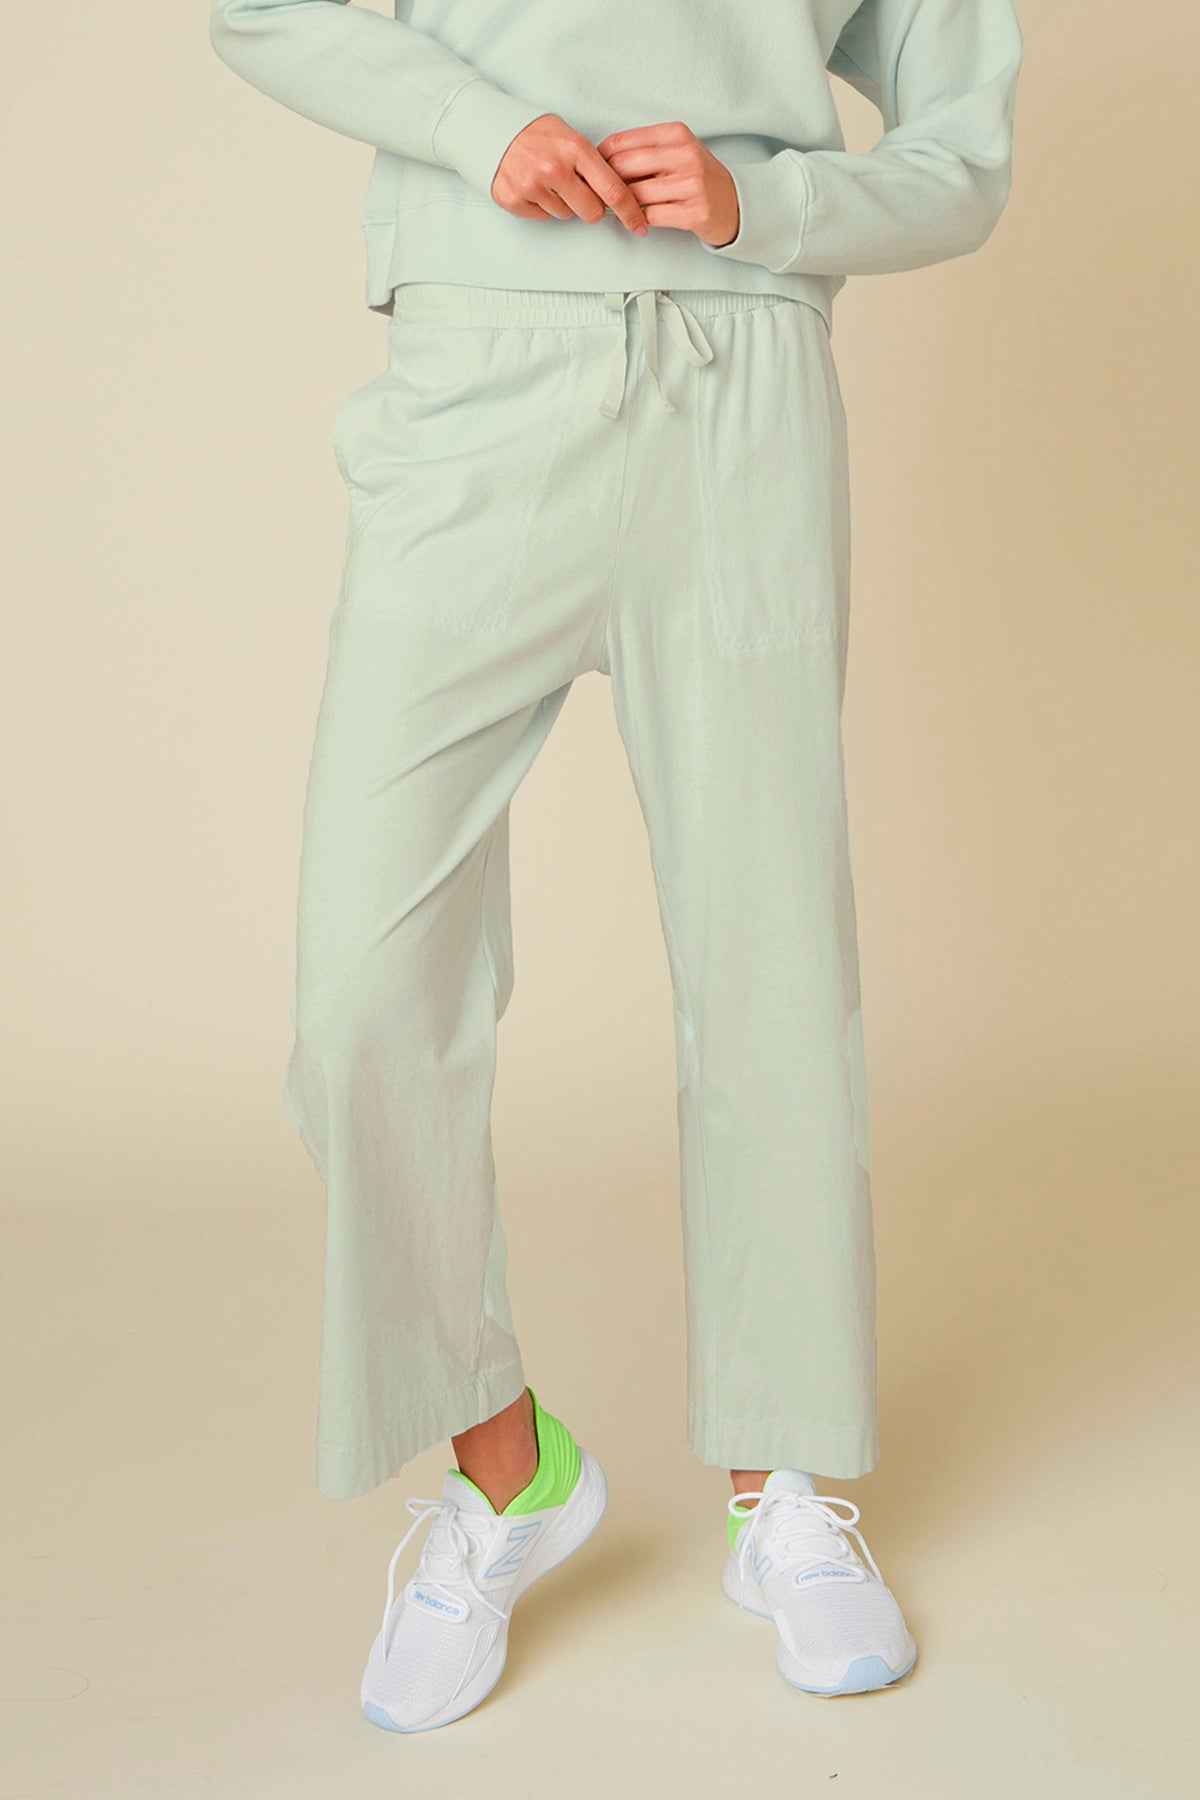   Pismo pant in pale mint green. 